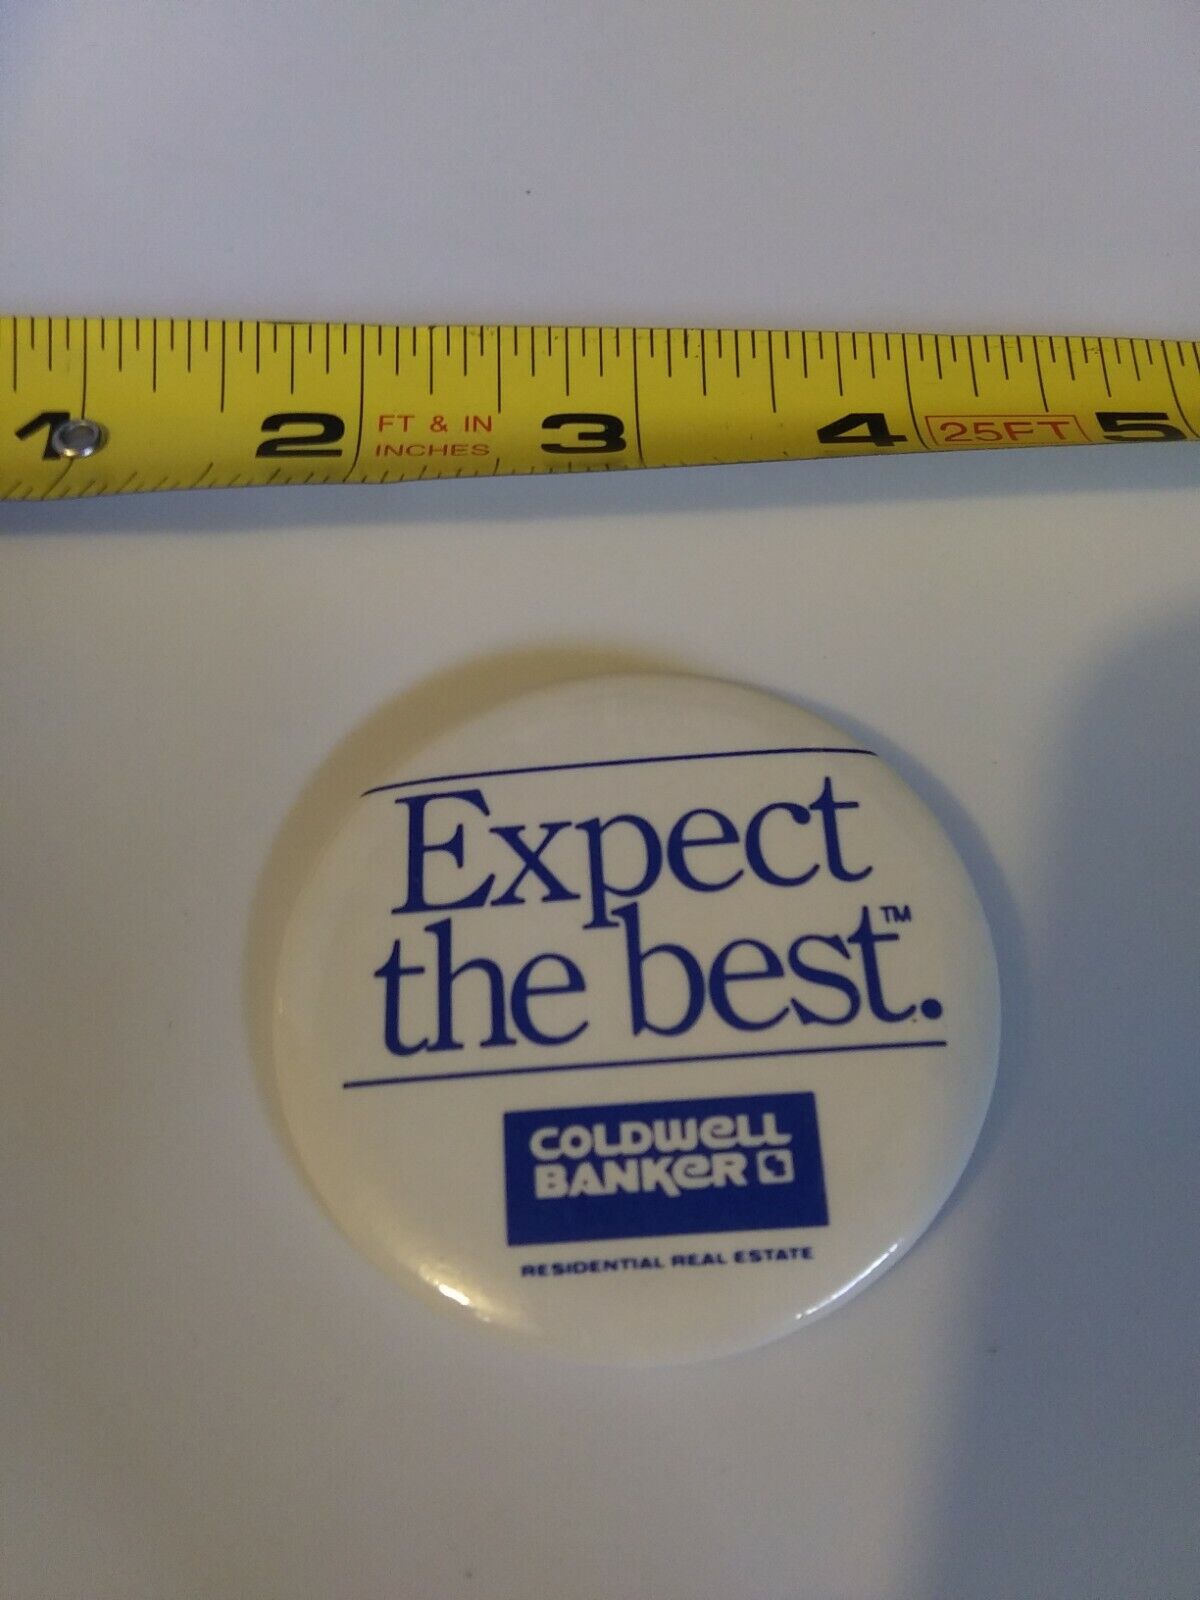 Vintage COLDWELL BANKER Expect the Best pin button pinback *EE76